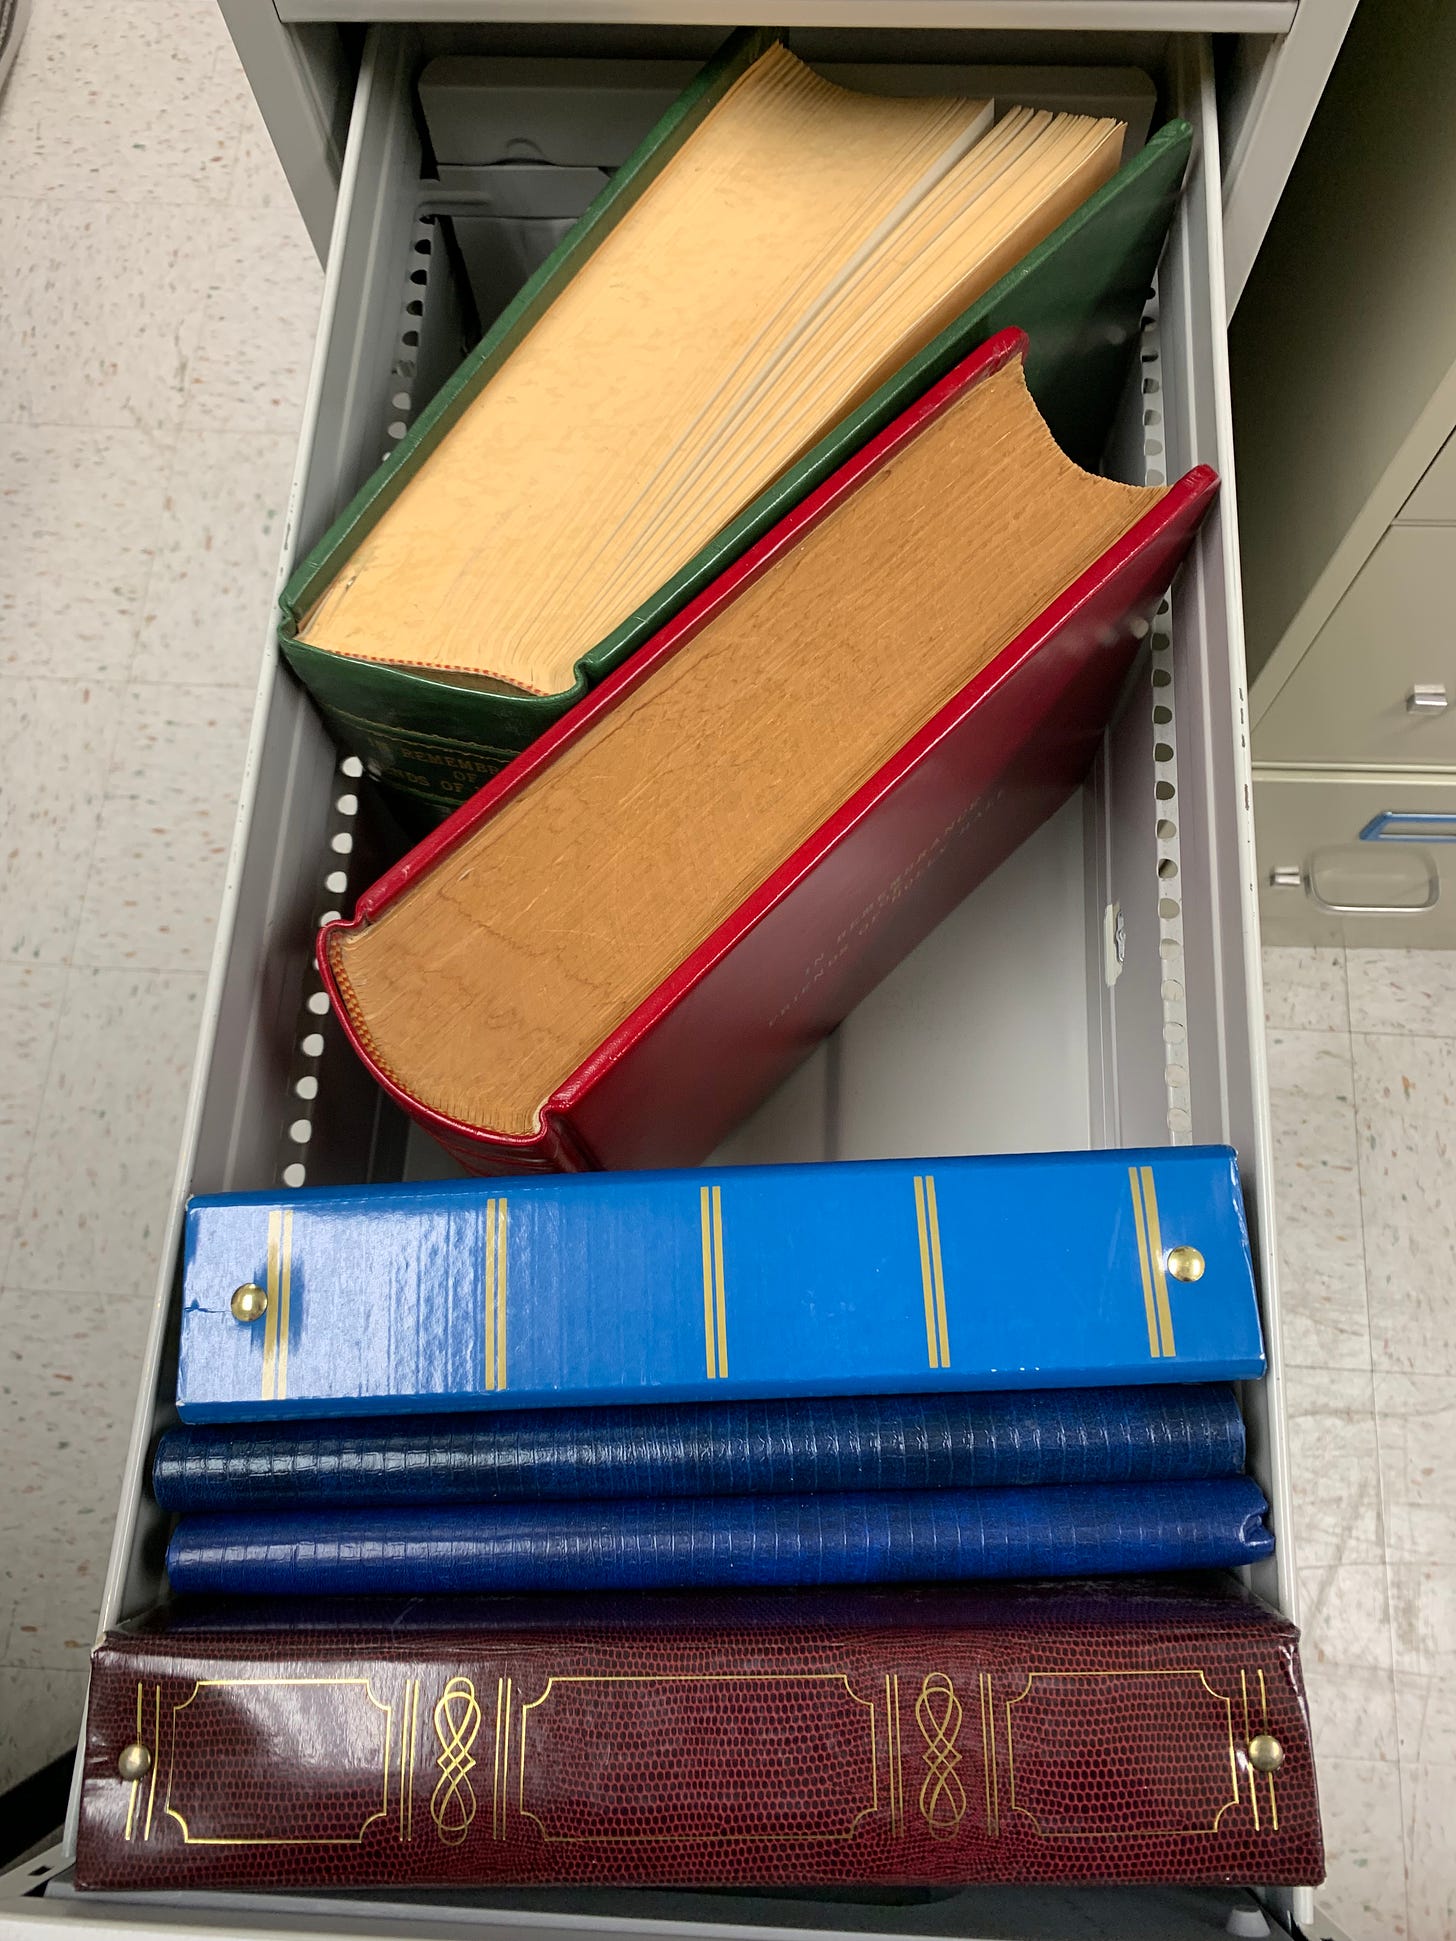 View of volumes and photo albums in a filing cabinet